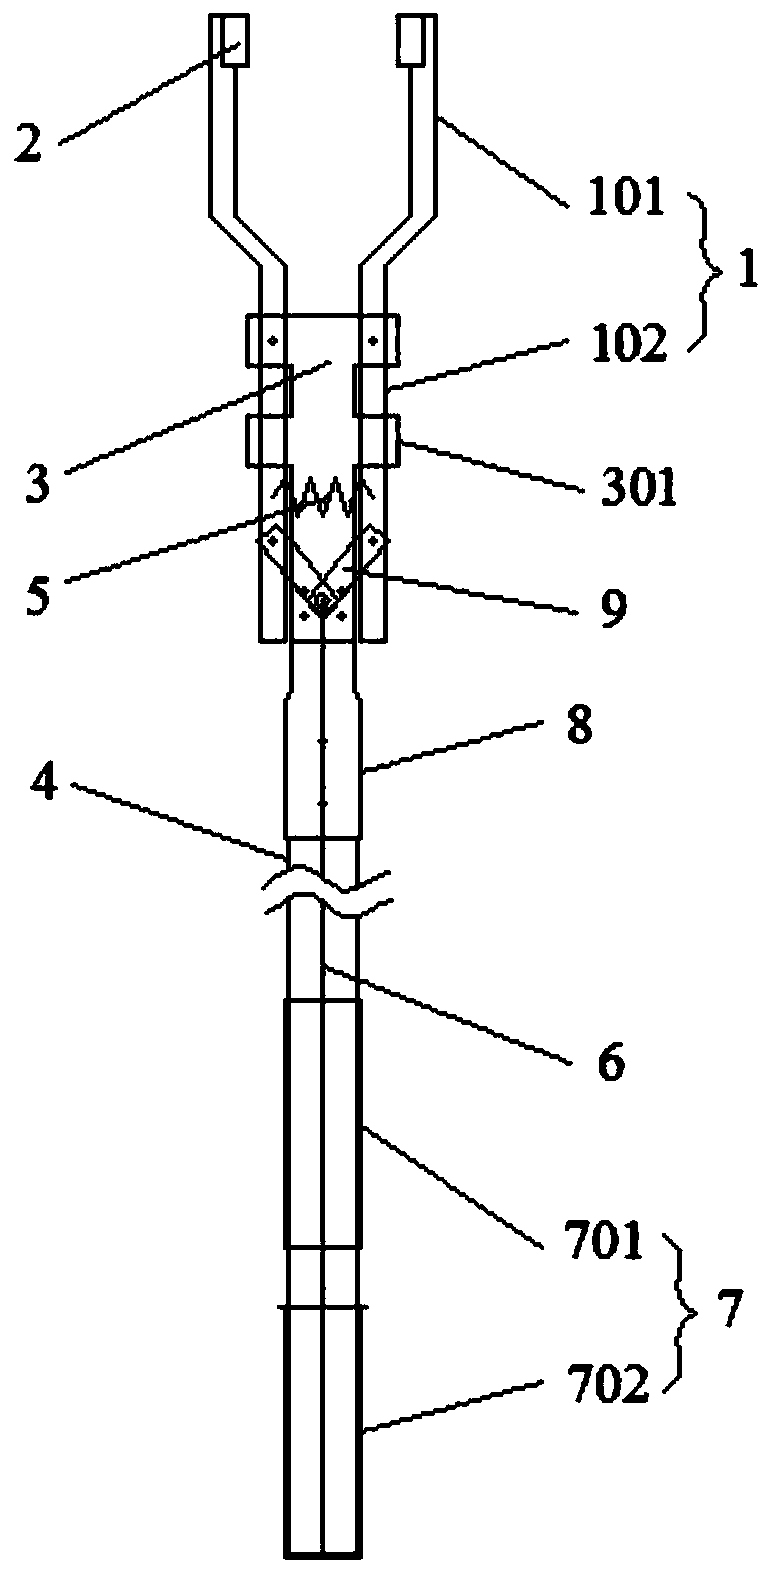 Bus-bar grounding rod for 10kV centrally-mounted switch cabinet